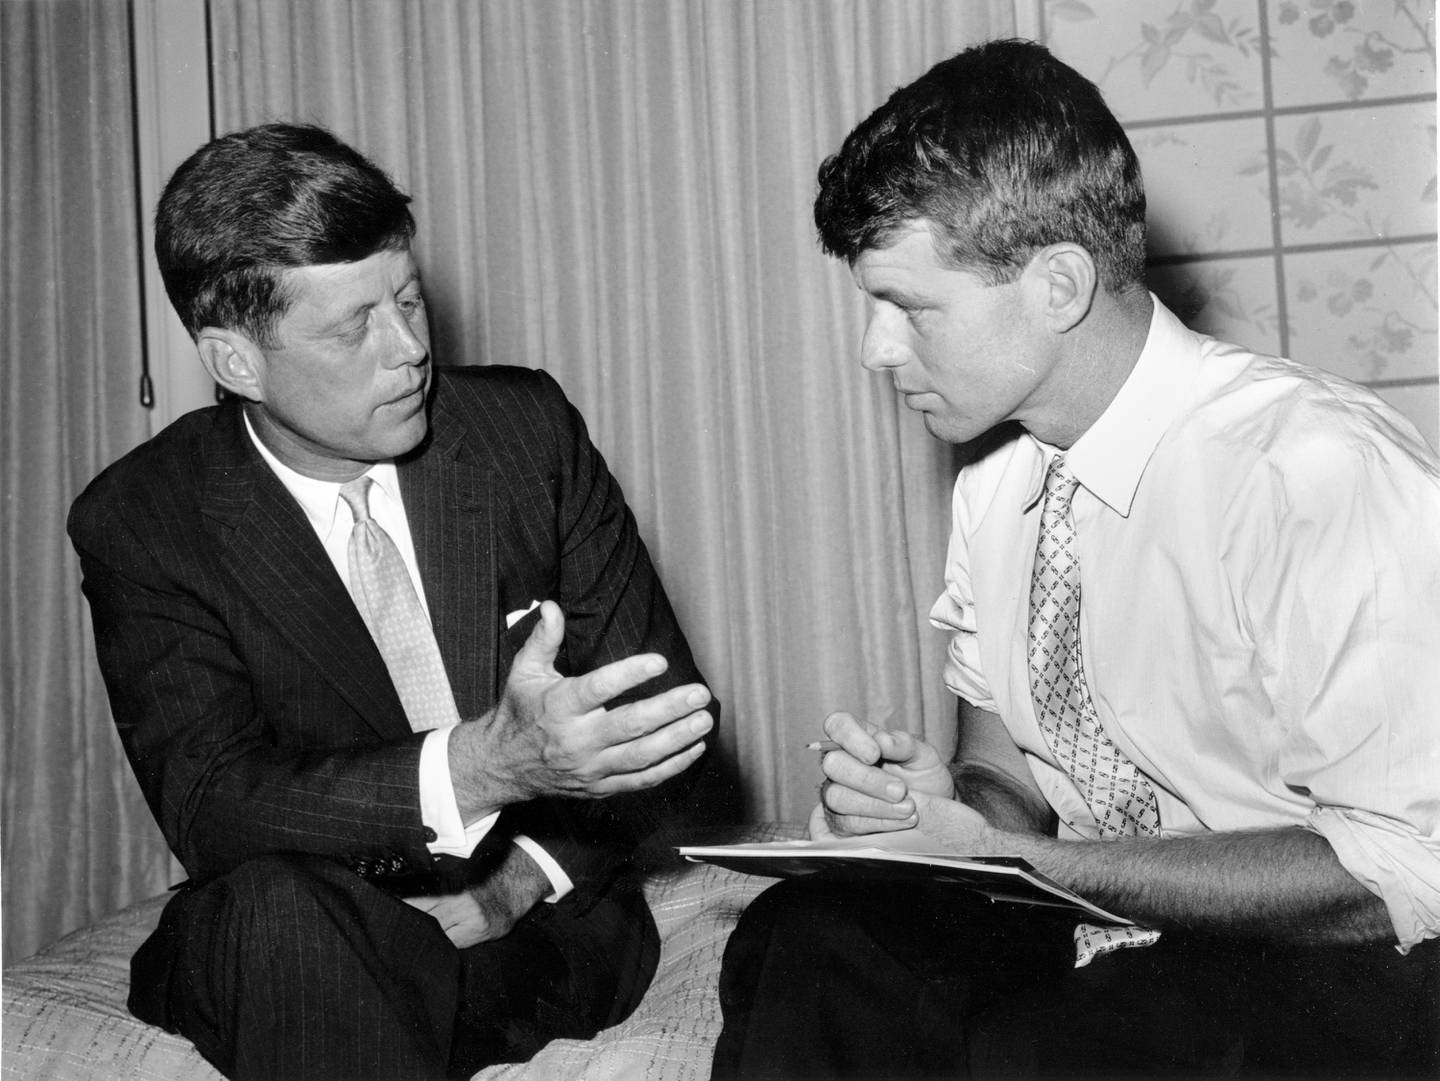 Massachusetts Sen. John F. Kennedy, left, compares notes with his brother and campaign manager, Robert Kennedy, on July 10, 1960 in an unknown location. The Senator is seeking the Democratic presidential nomination. (AP Photo)